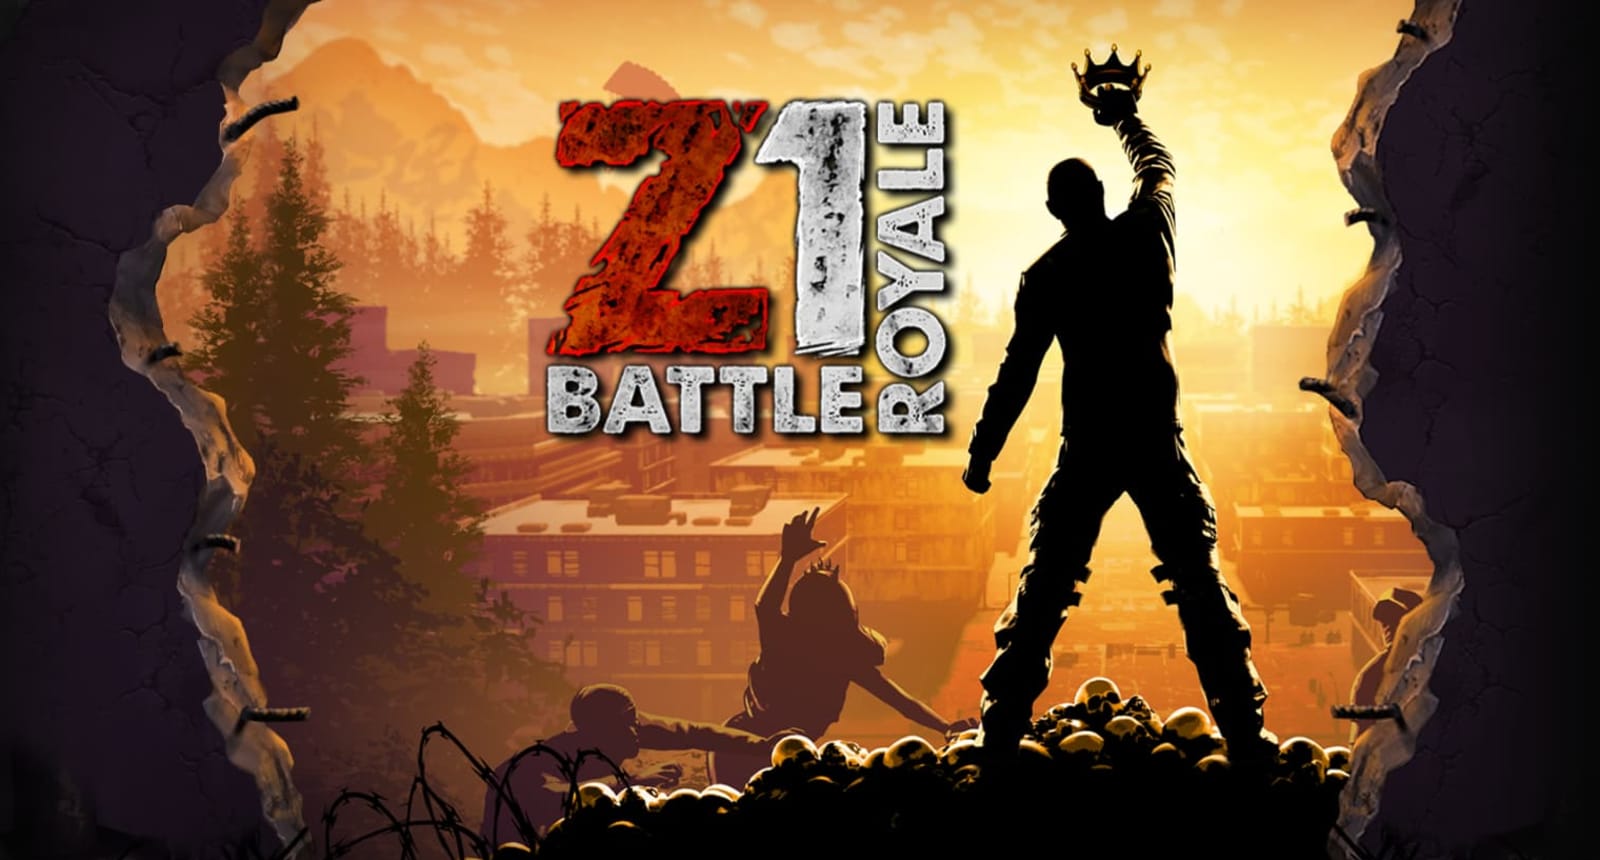 H1Z1' has a new name and old mechanics